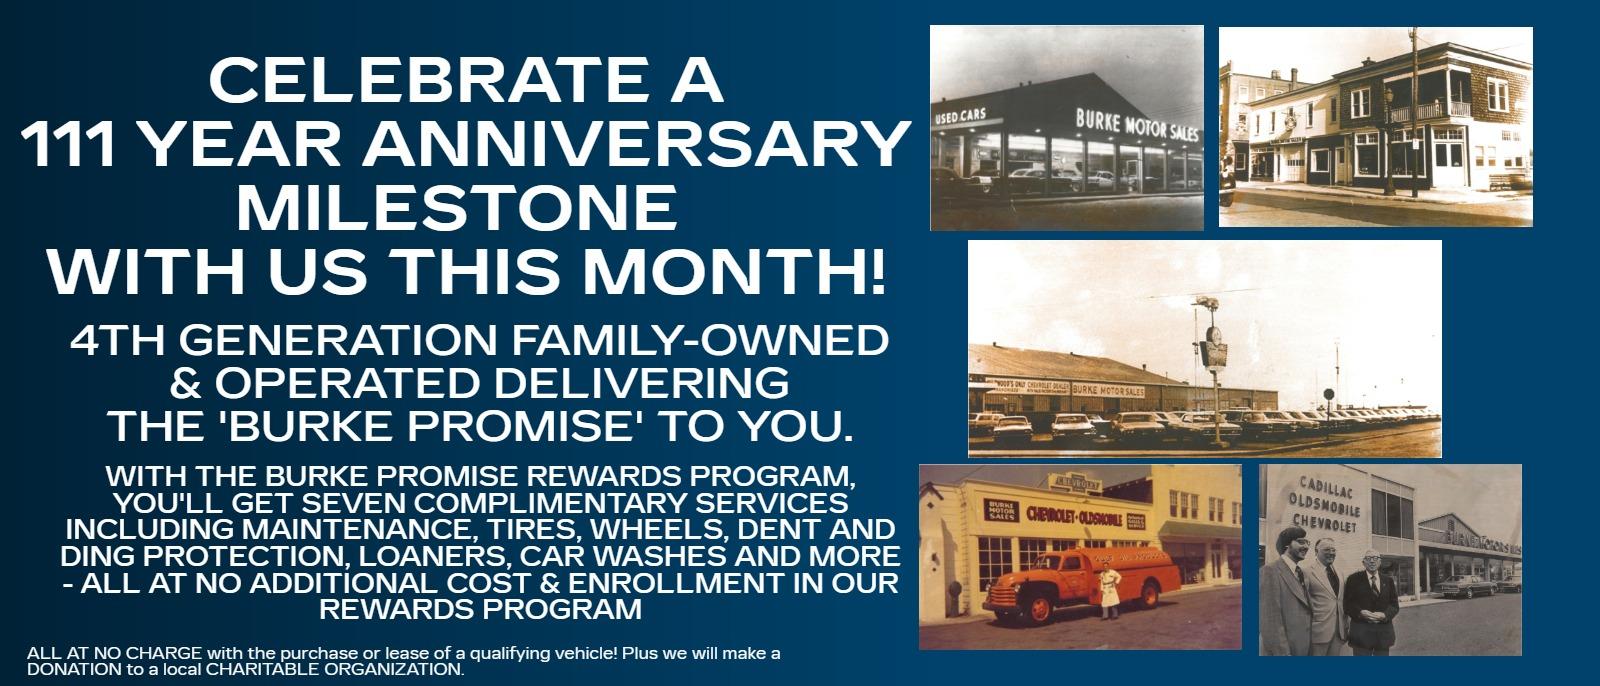 CELEBRATE A 110 YEAR ANNIVERSARY MILESTONE with us this month!
4th Generation Family-Owned & Operated delivering The 'Burke Promise' to you.

With the Burke Promise Rewards Program, you'll get seven complimentary services including maintenance, tires, wheels, dent and ding protection, loaners, car washes and more - all at no additional cost & enrollment in our Rewards Program